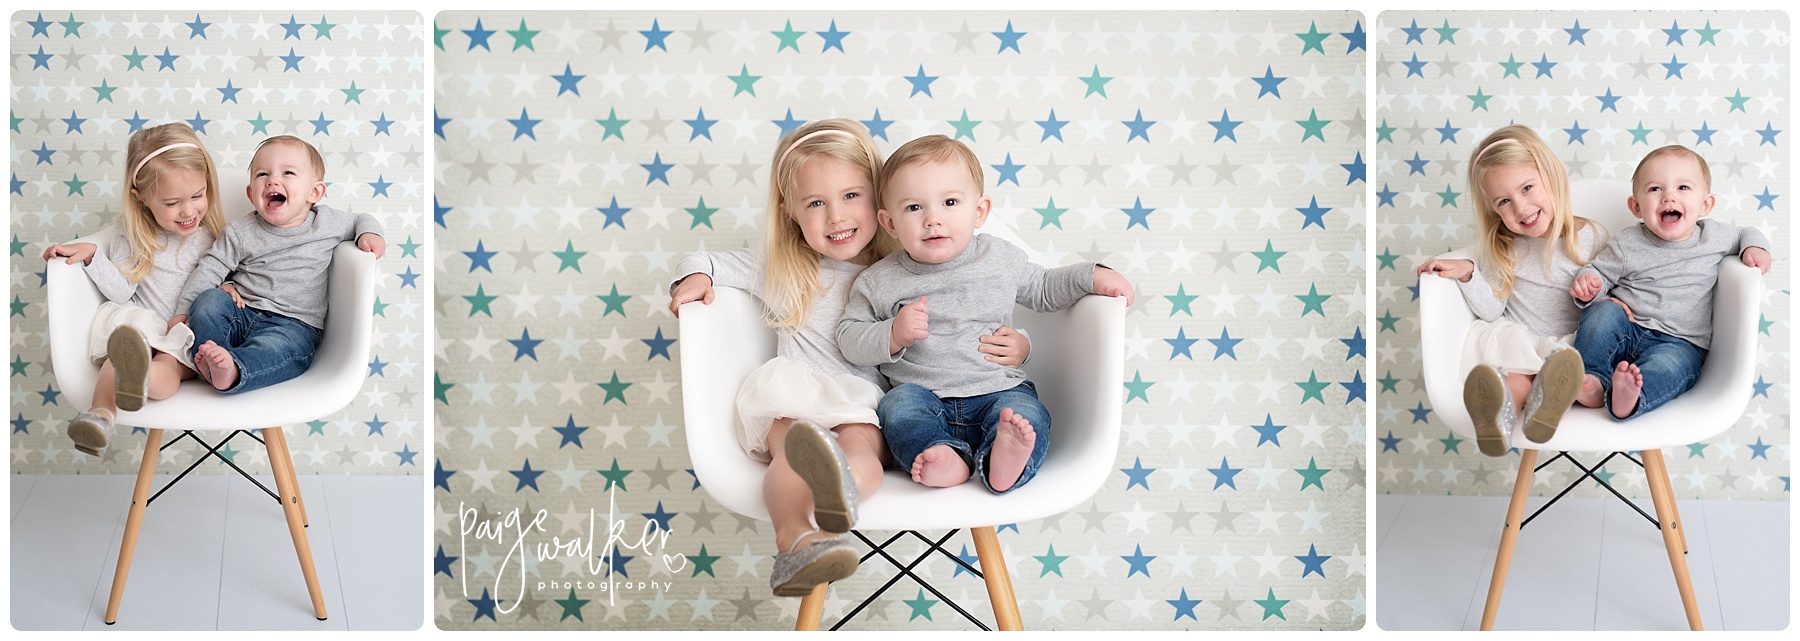 siblings together in a white chair